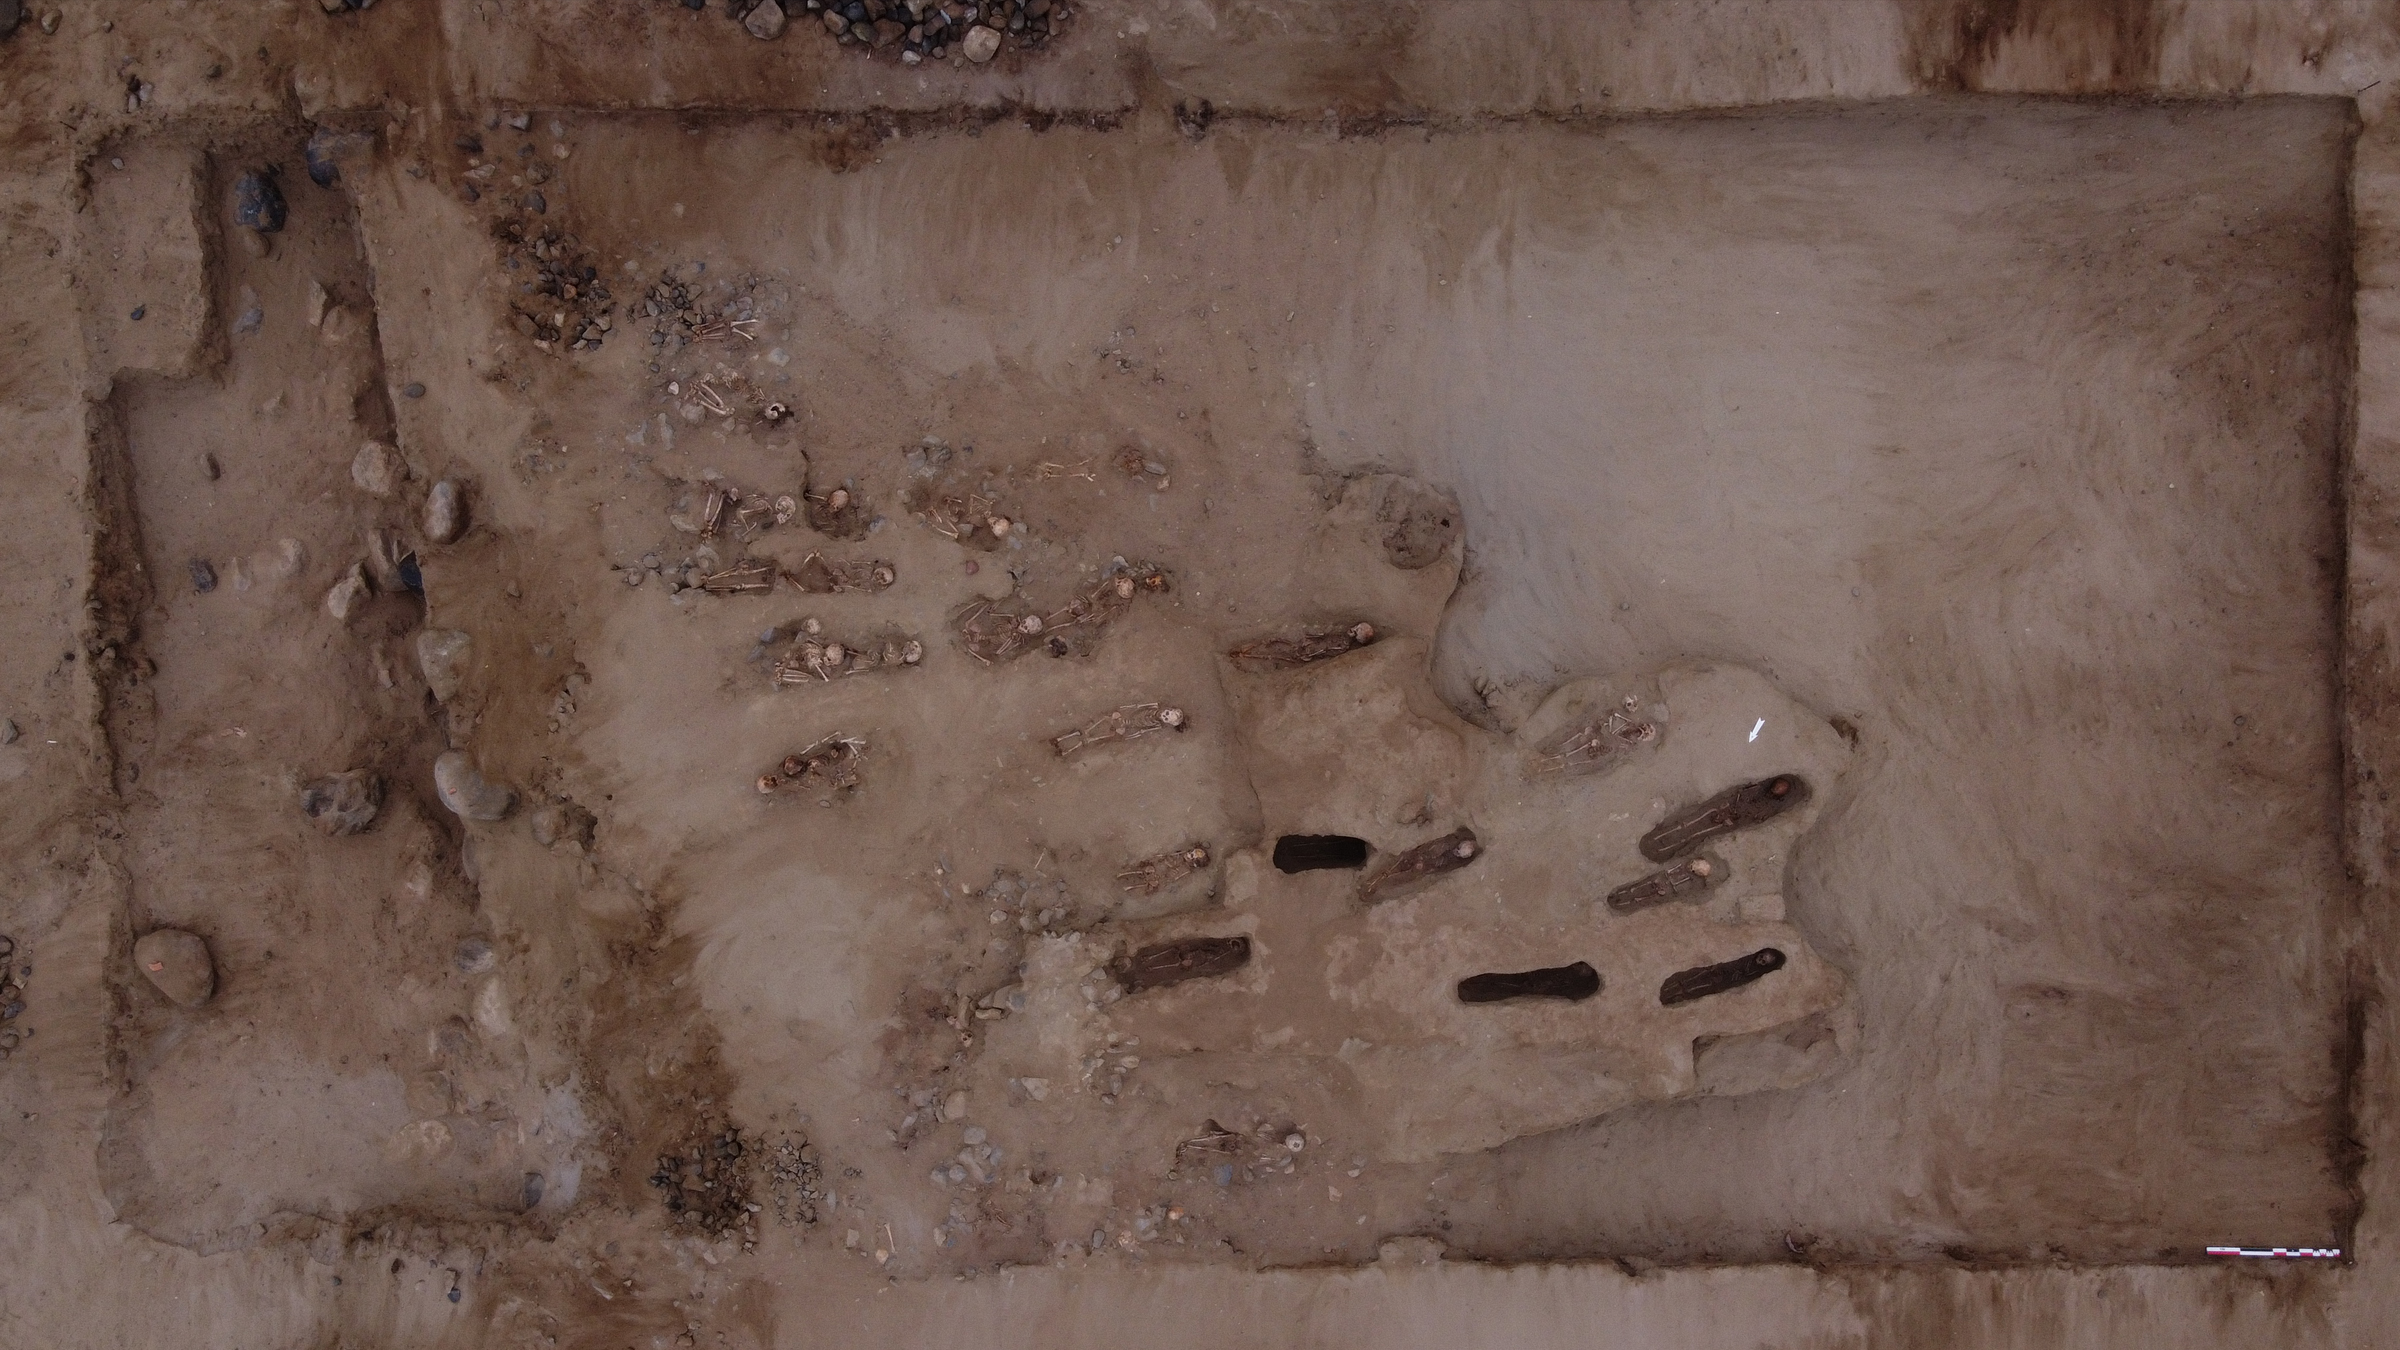 A panoramic view of the burial site in Peru showing human skeletons.